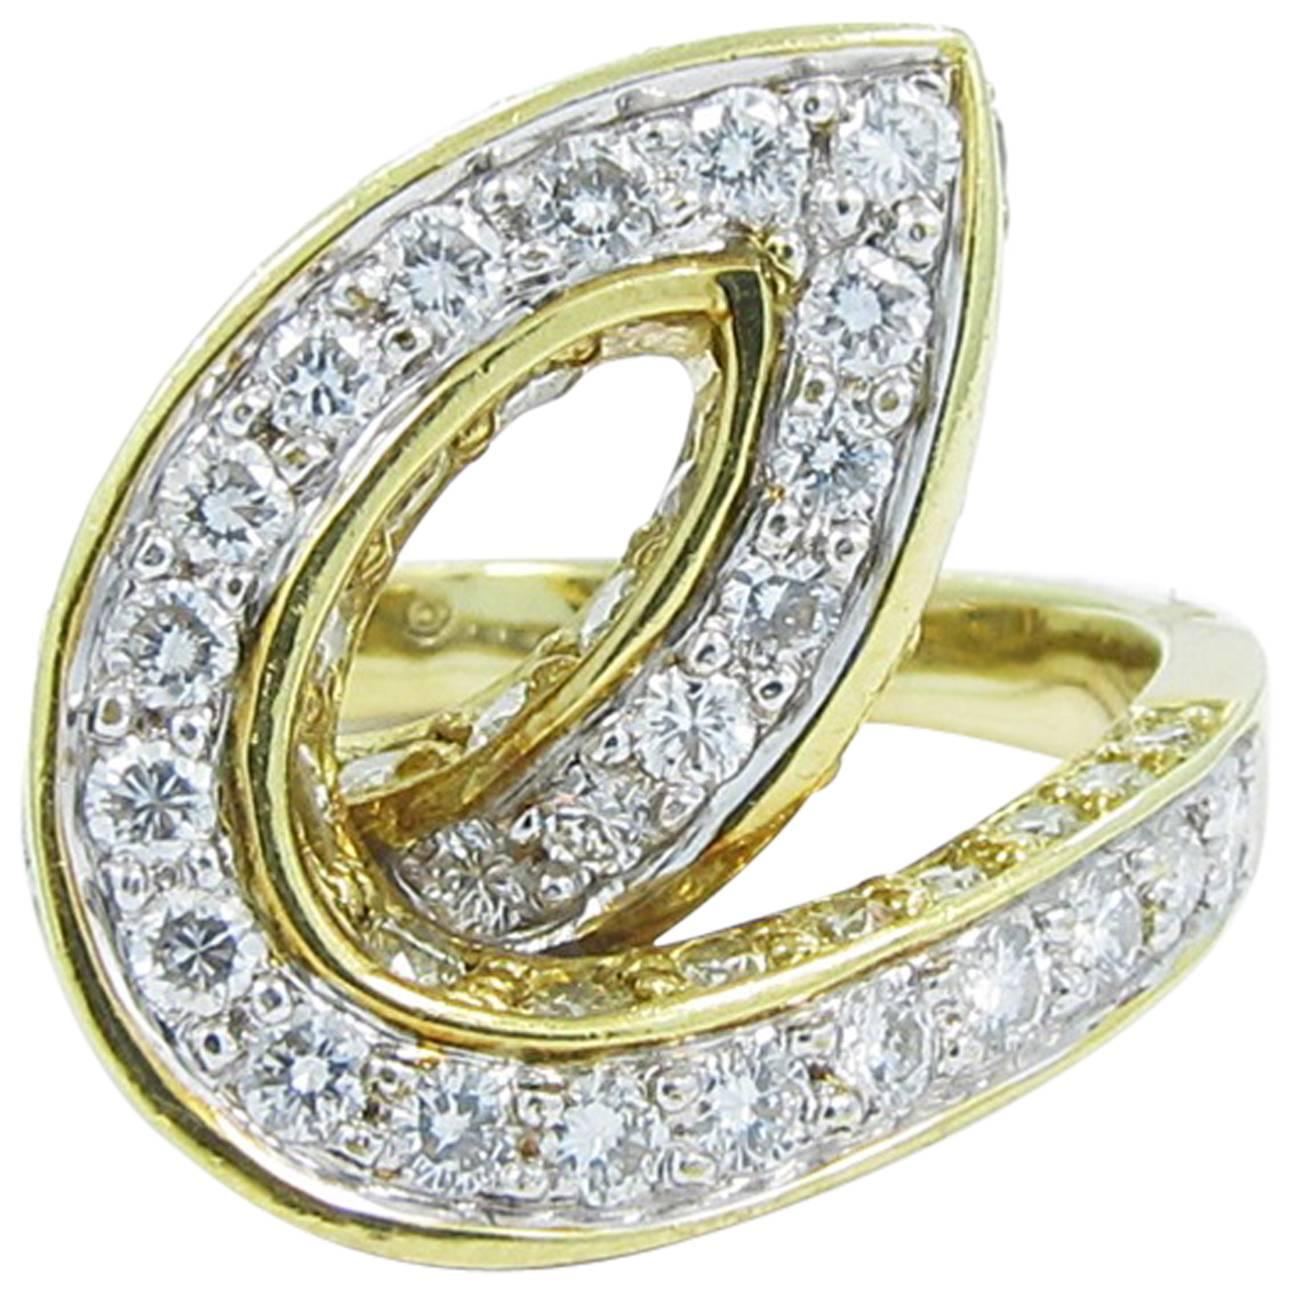 Lavin 3 Carats Diamonds Gold Ring For Sale